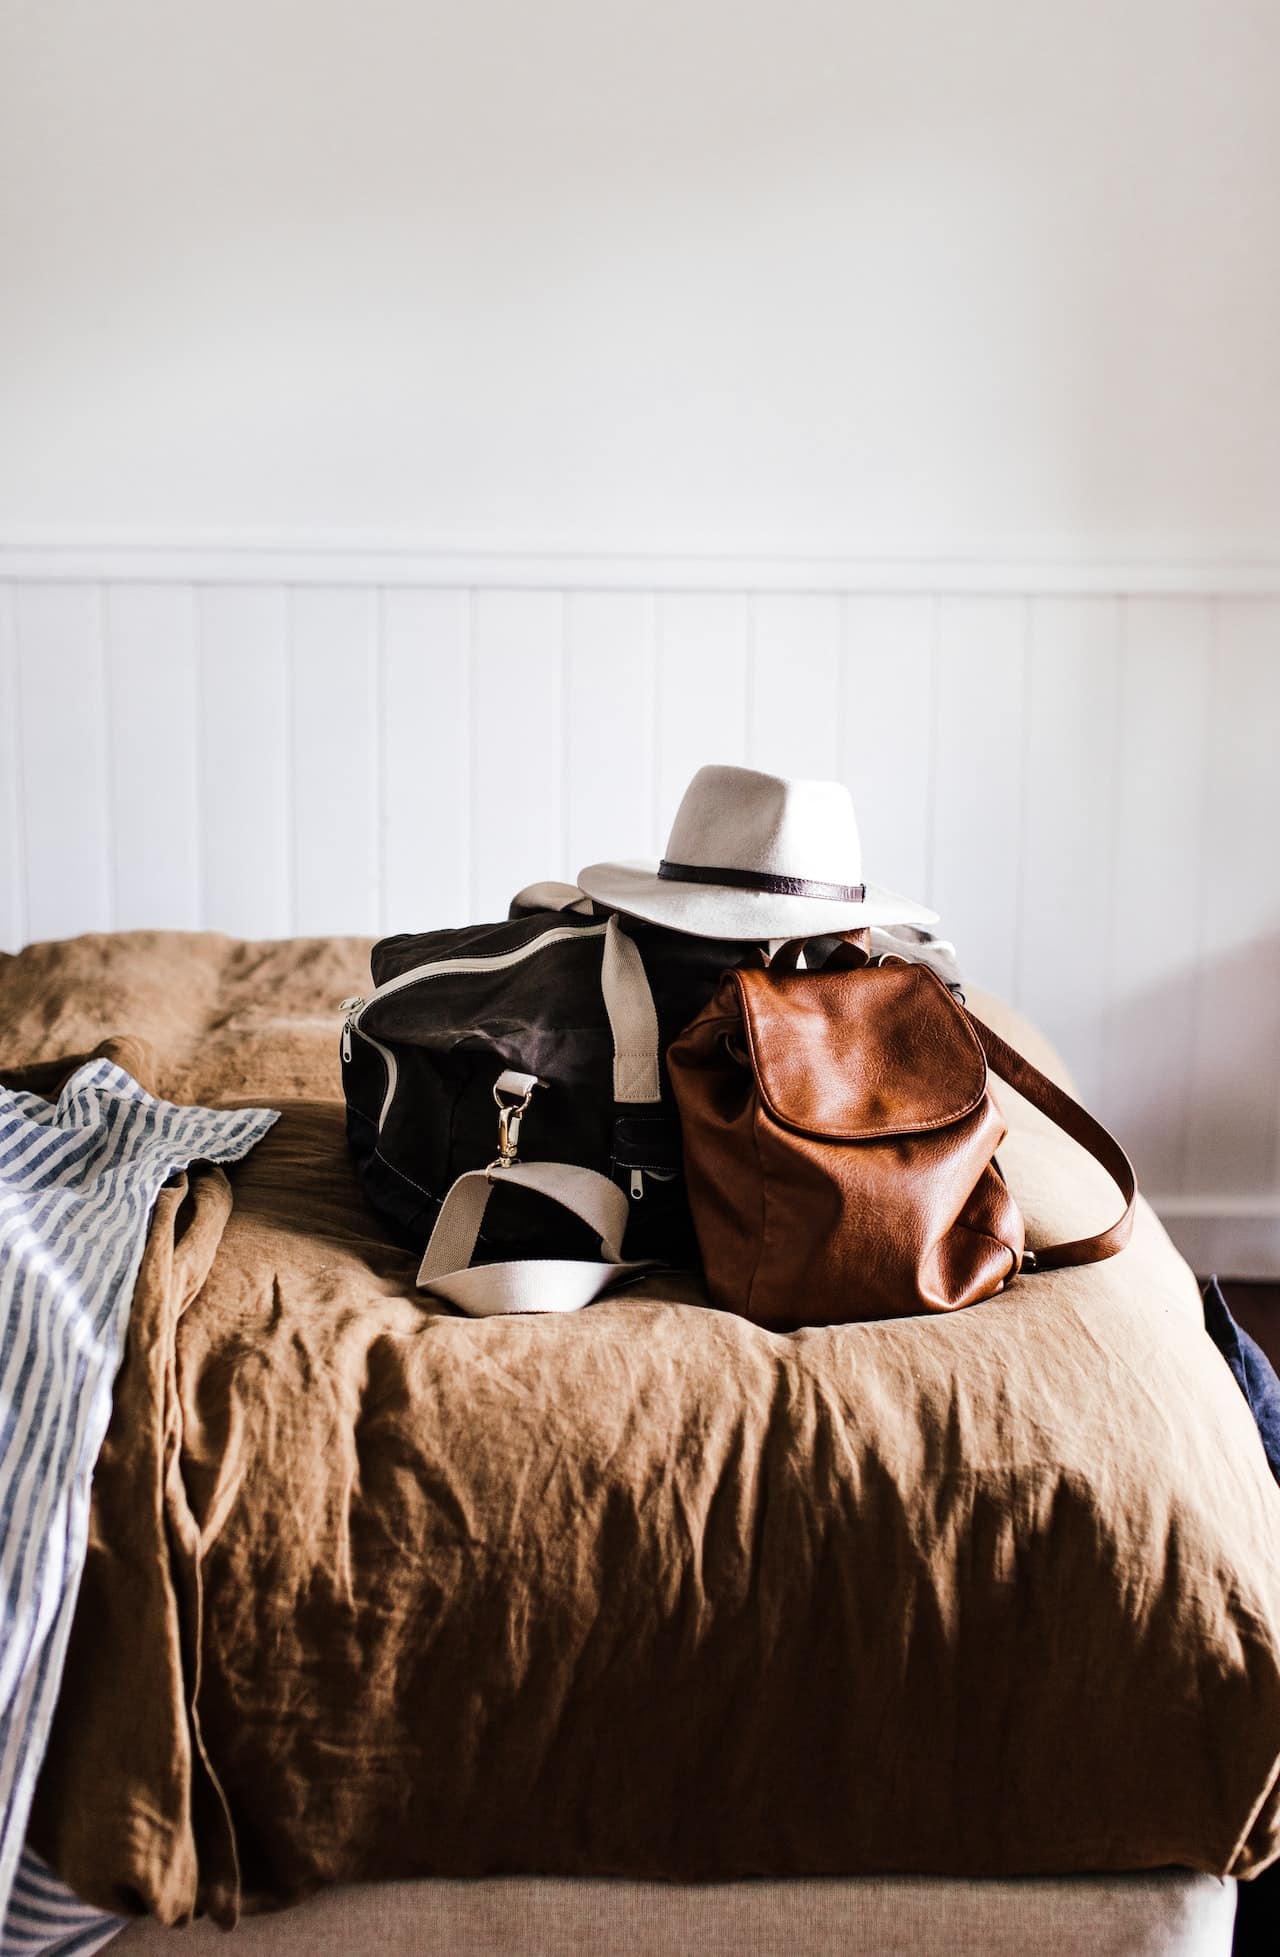 Things You Should Always Pack In Your Carry-On